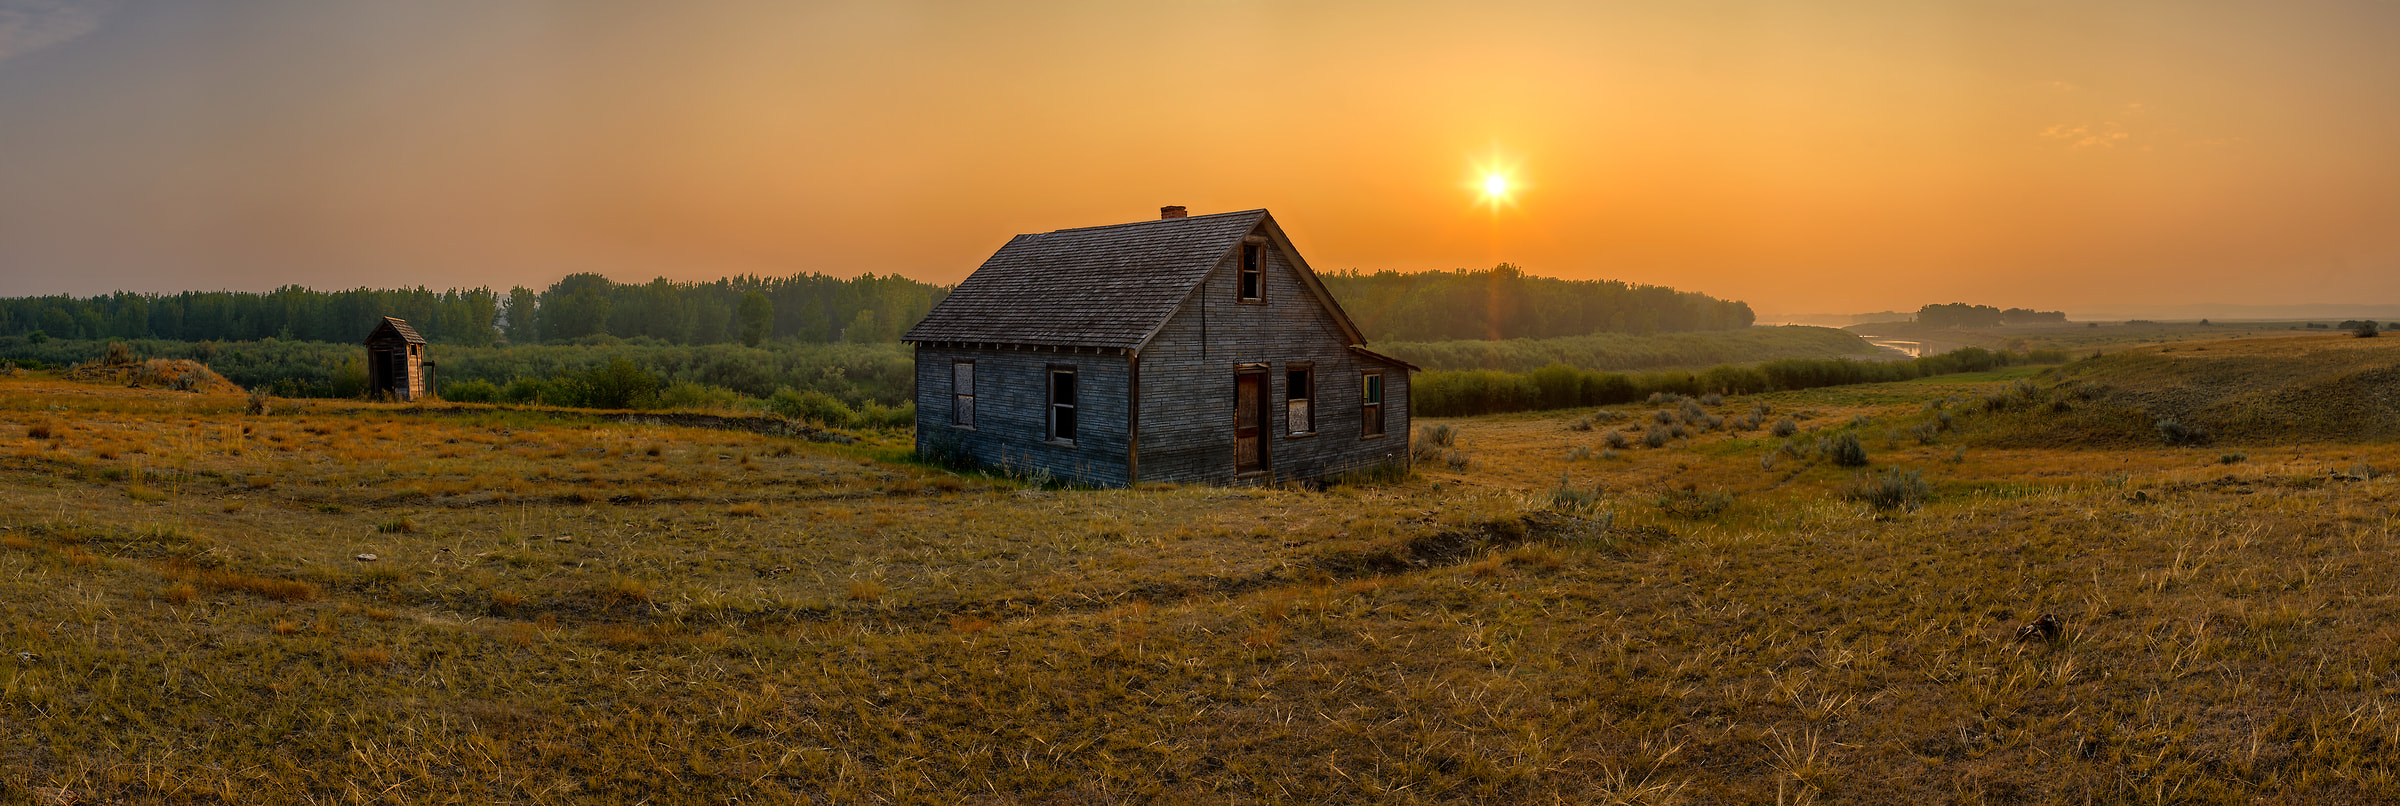 220 megapixels! A very high resolution, large-format VAST photo of farmland, grasslands, the prairie, and an old abandoned house; fine art landscape photo created at sunrise by Scott Dimond on the Great Plains in Saskatchewan, Canada.